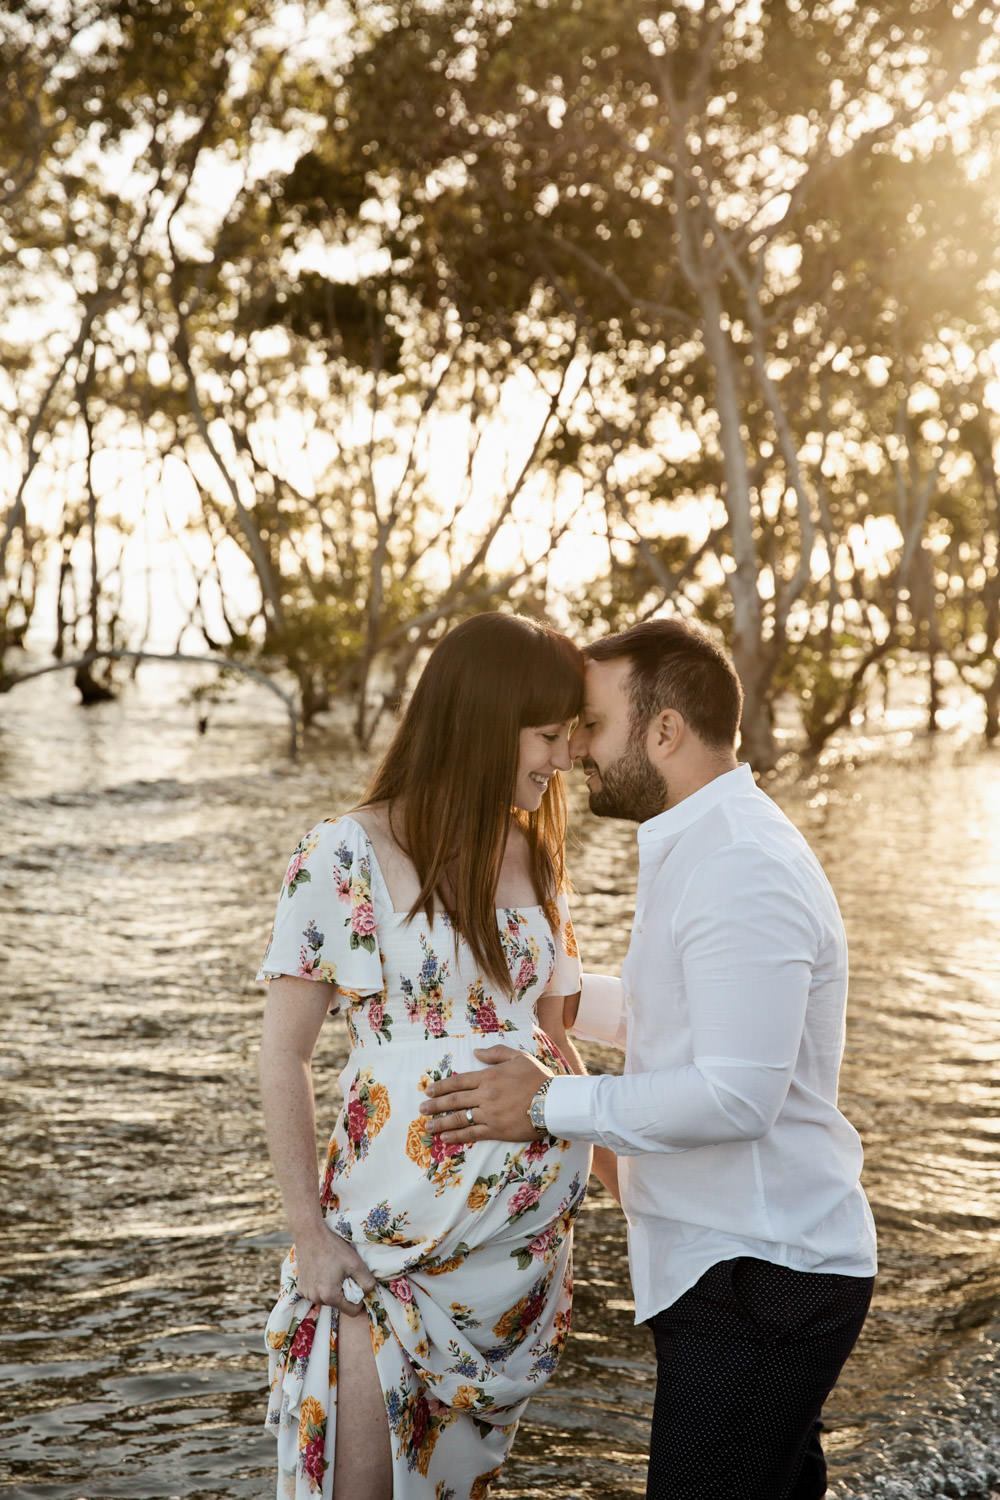 022_Maternity_Newborn_Family-Photography-Packages_Beach_Brisbane-GoldCoast-Natural-1